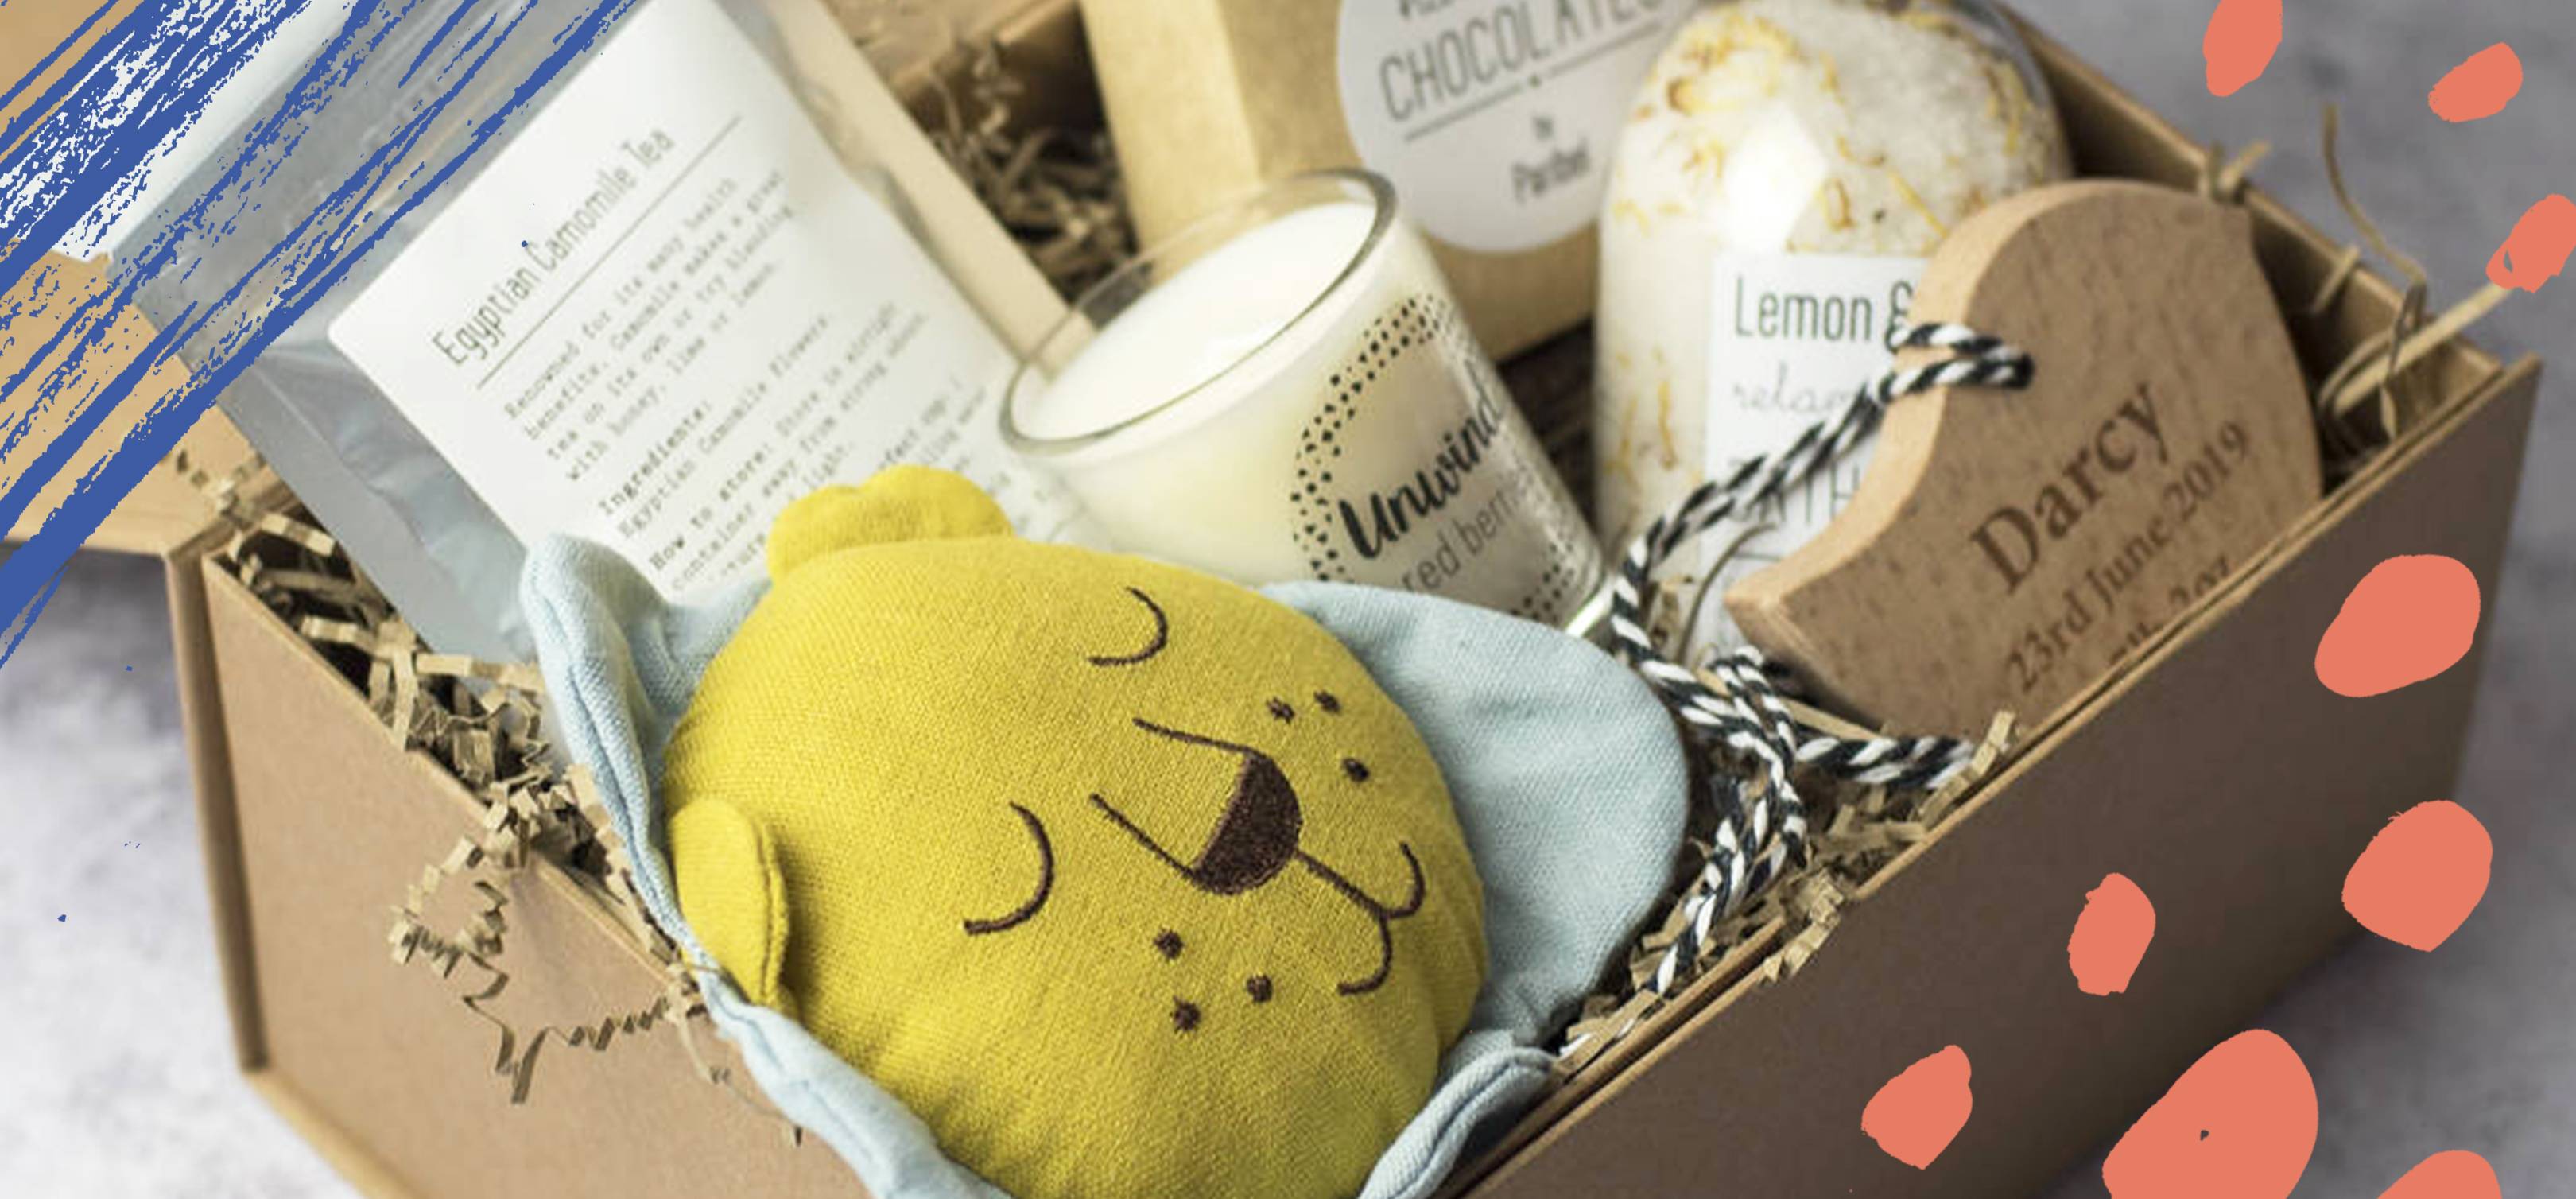 thoughtful gifts for new mums